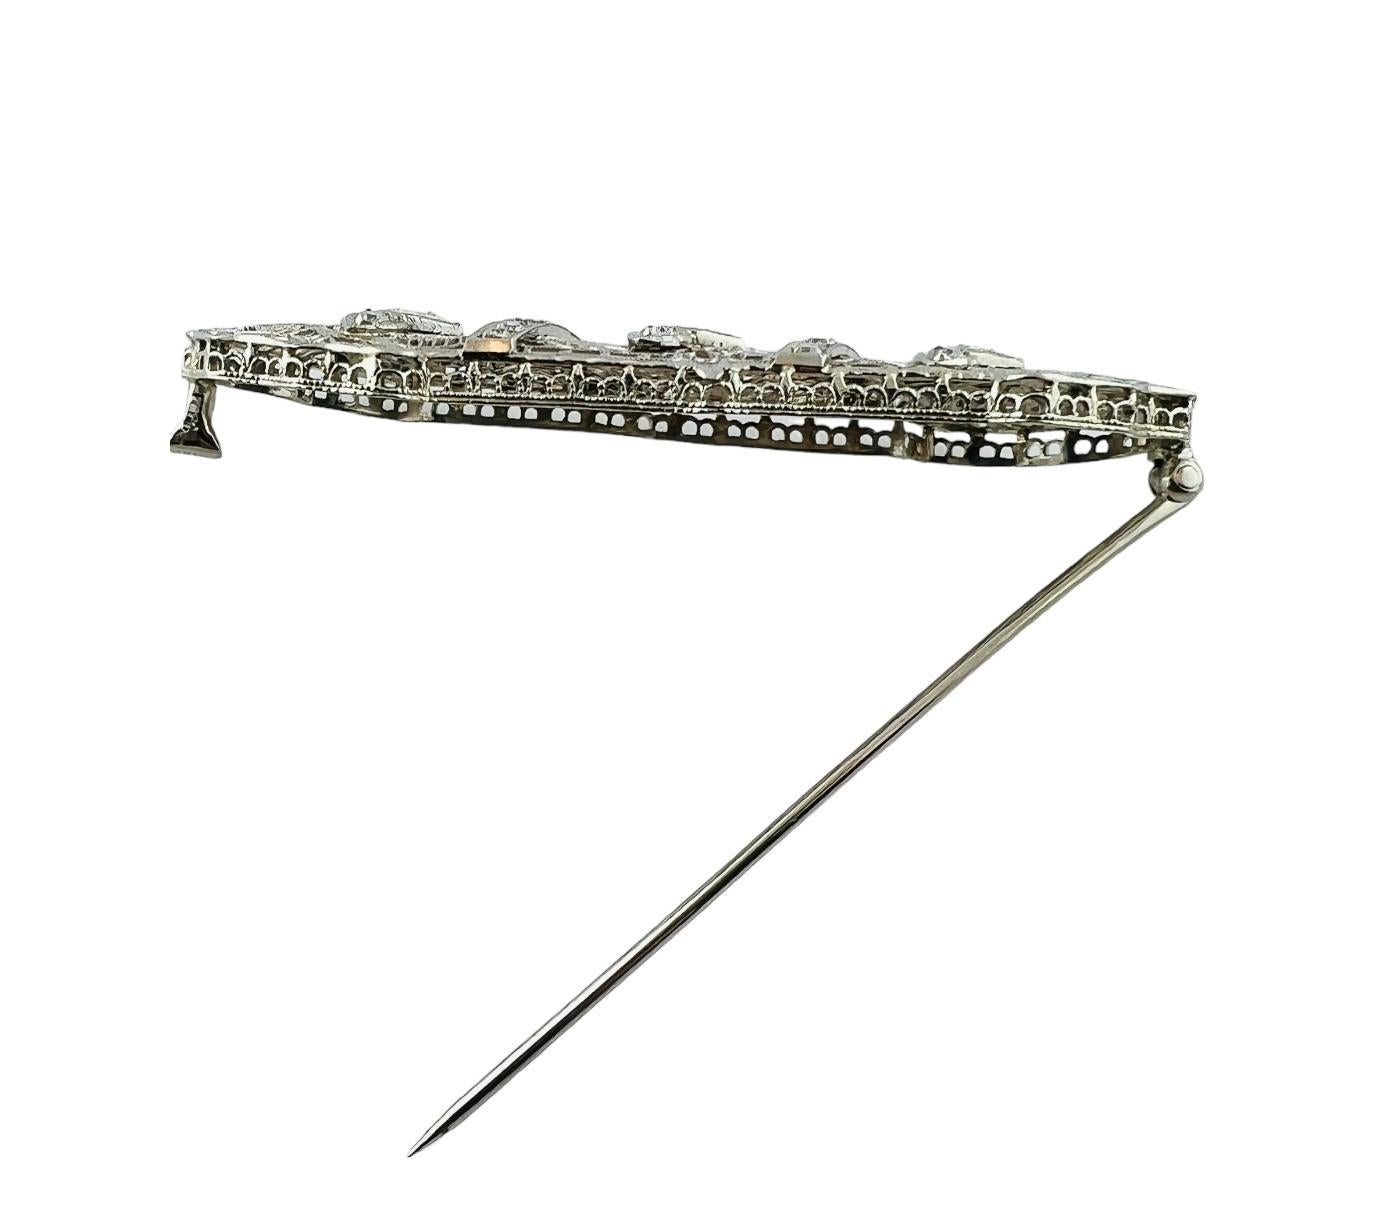 Antique Art Deco 14K White Gold Diamond Filigree Brooch Pin #17046 In Good Condition For Sale In Washington Depot, CT